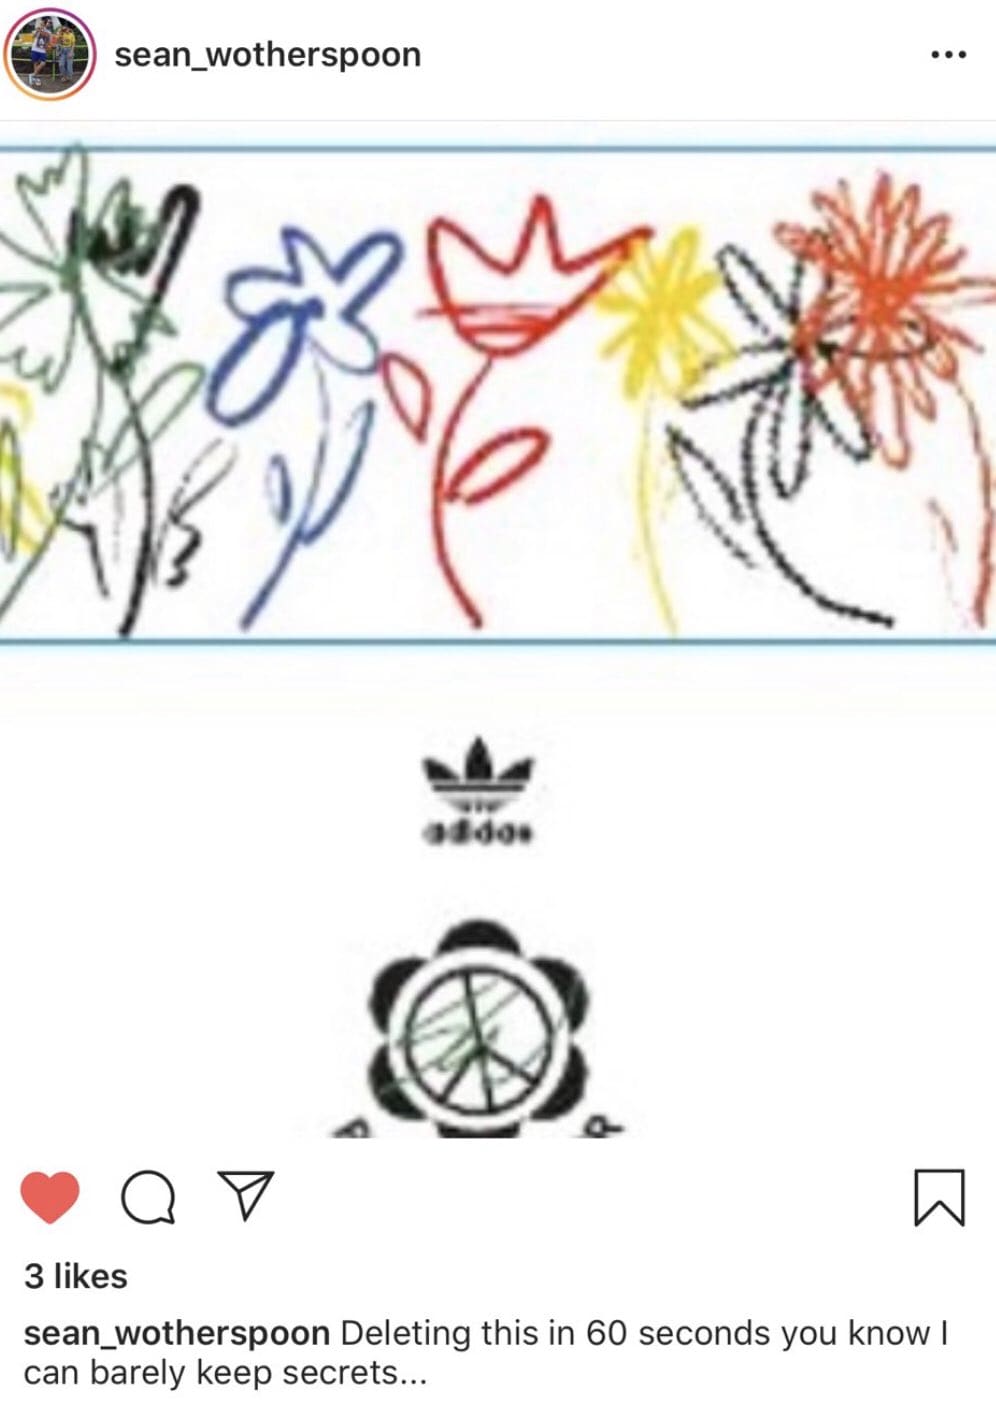 sean-wotherspoon-adidas-collaboration-teaser.jpeg